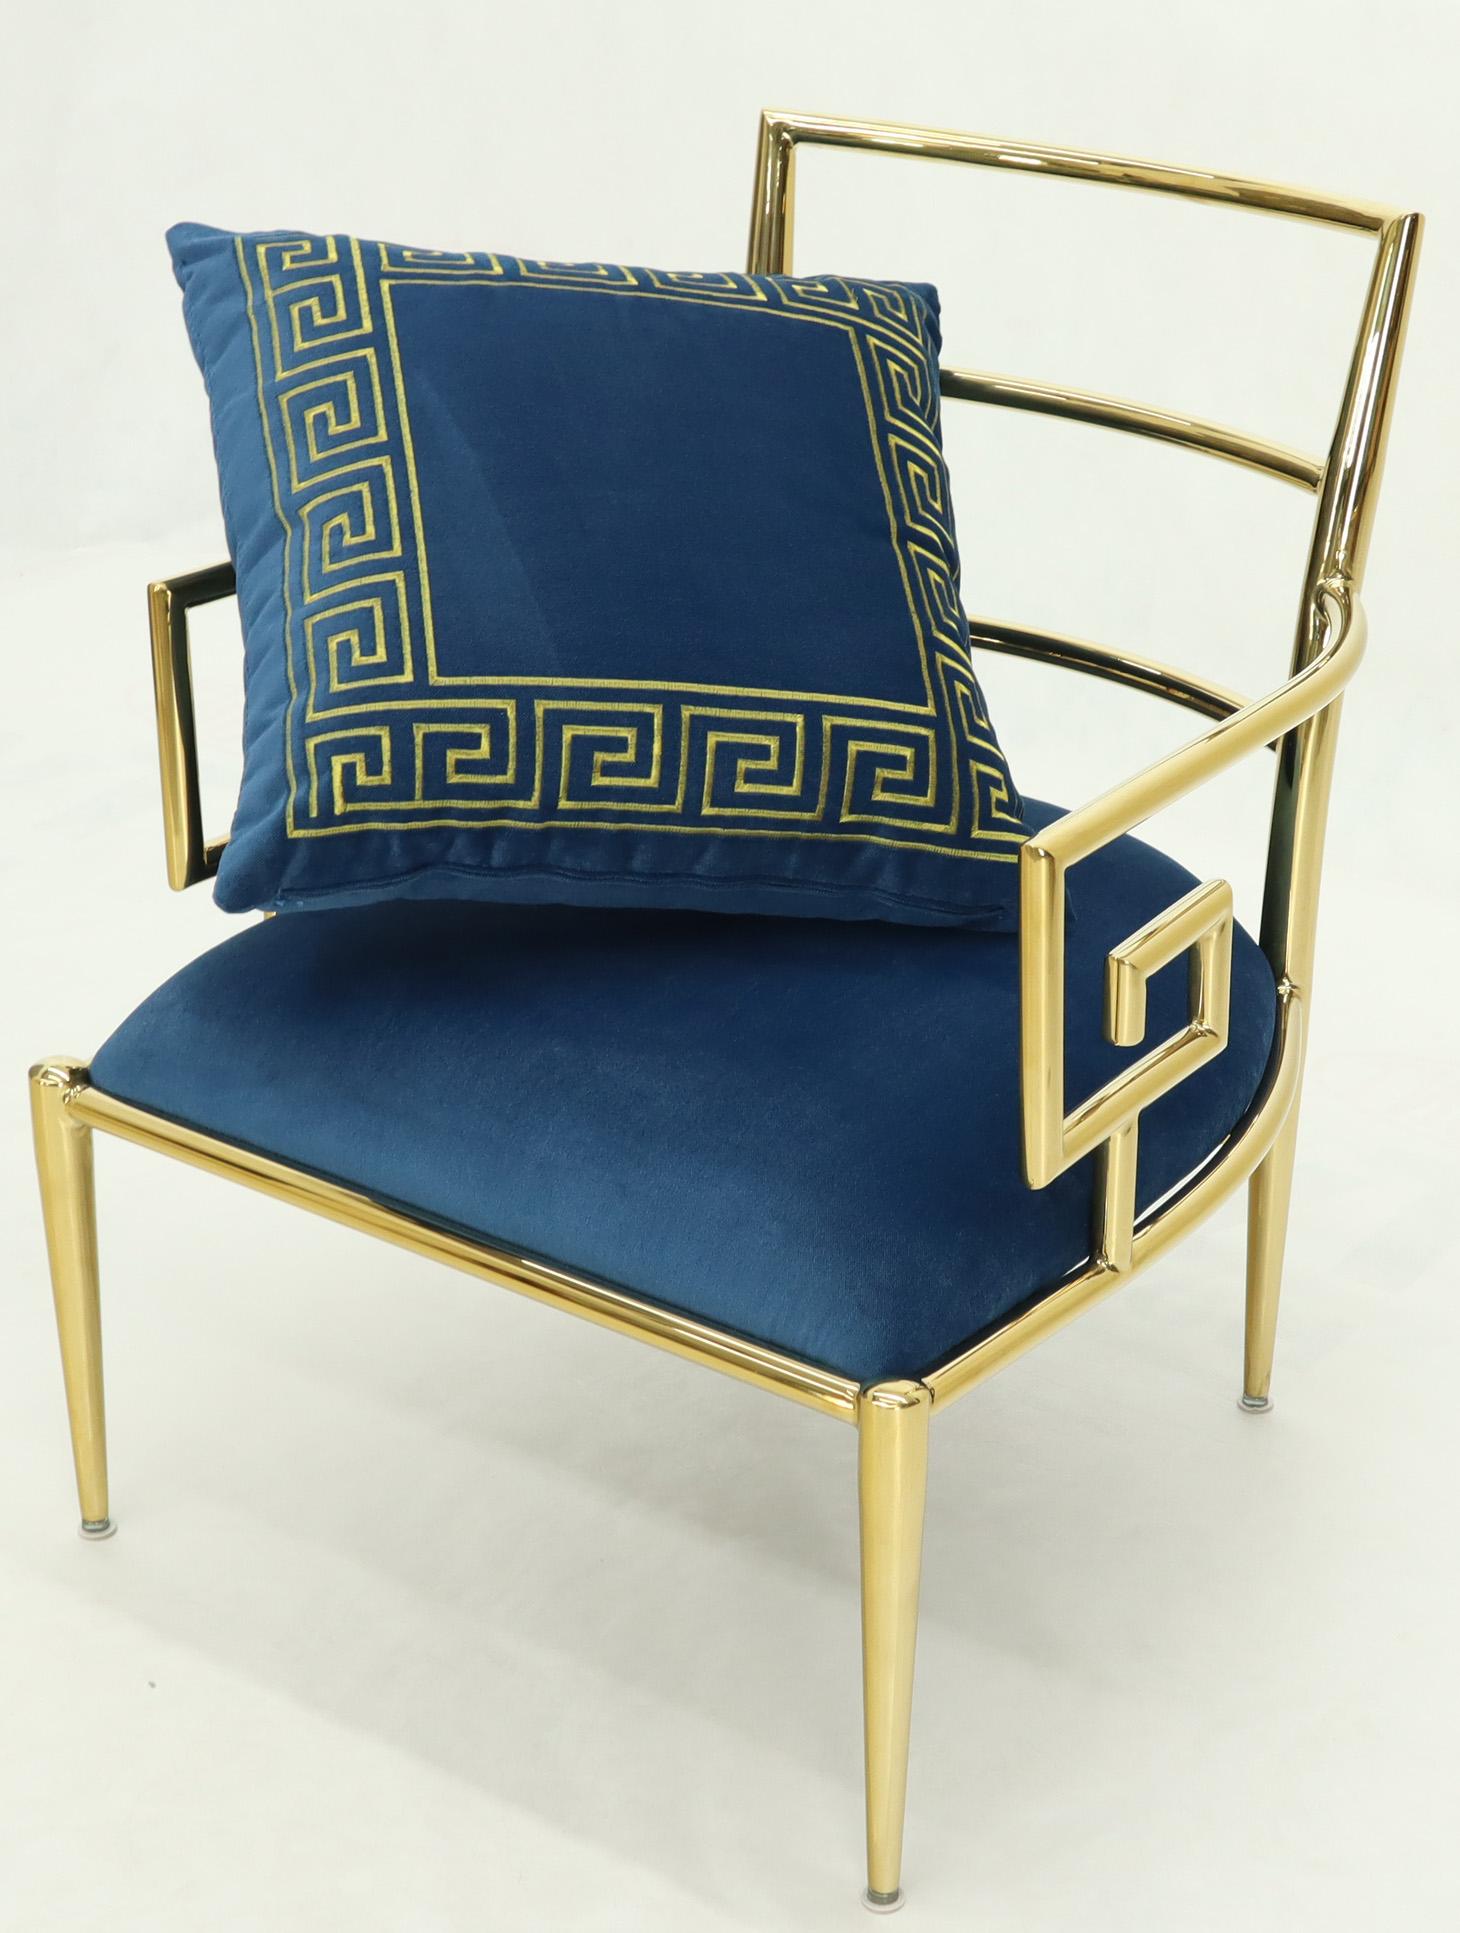 Pair of Greek Key Brass and Blue Velvet Lounge Chairs 1